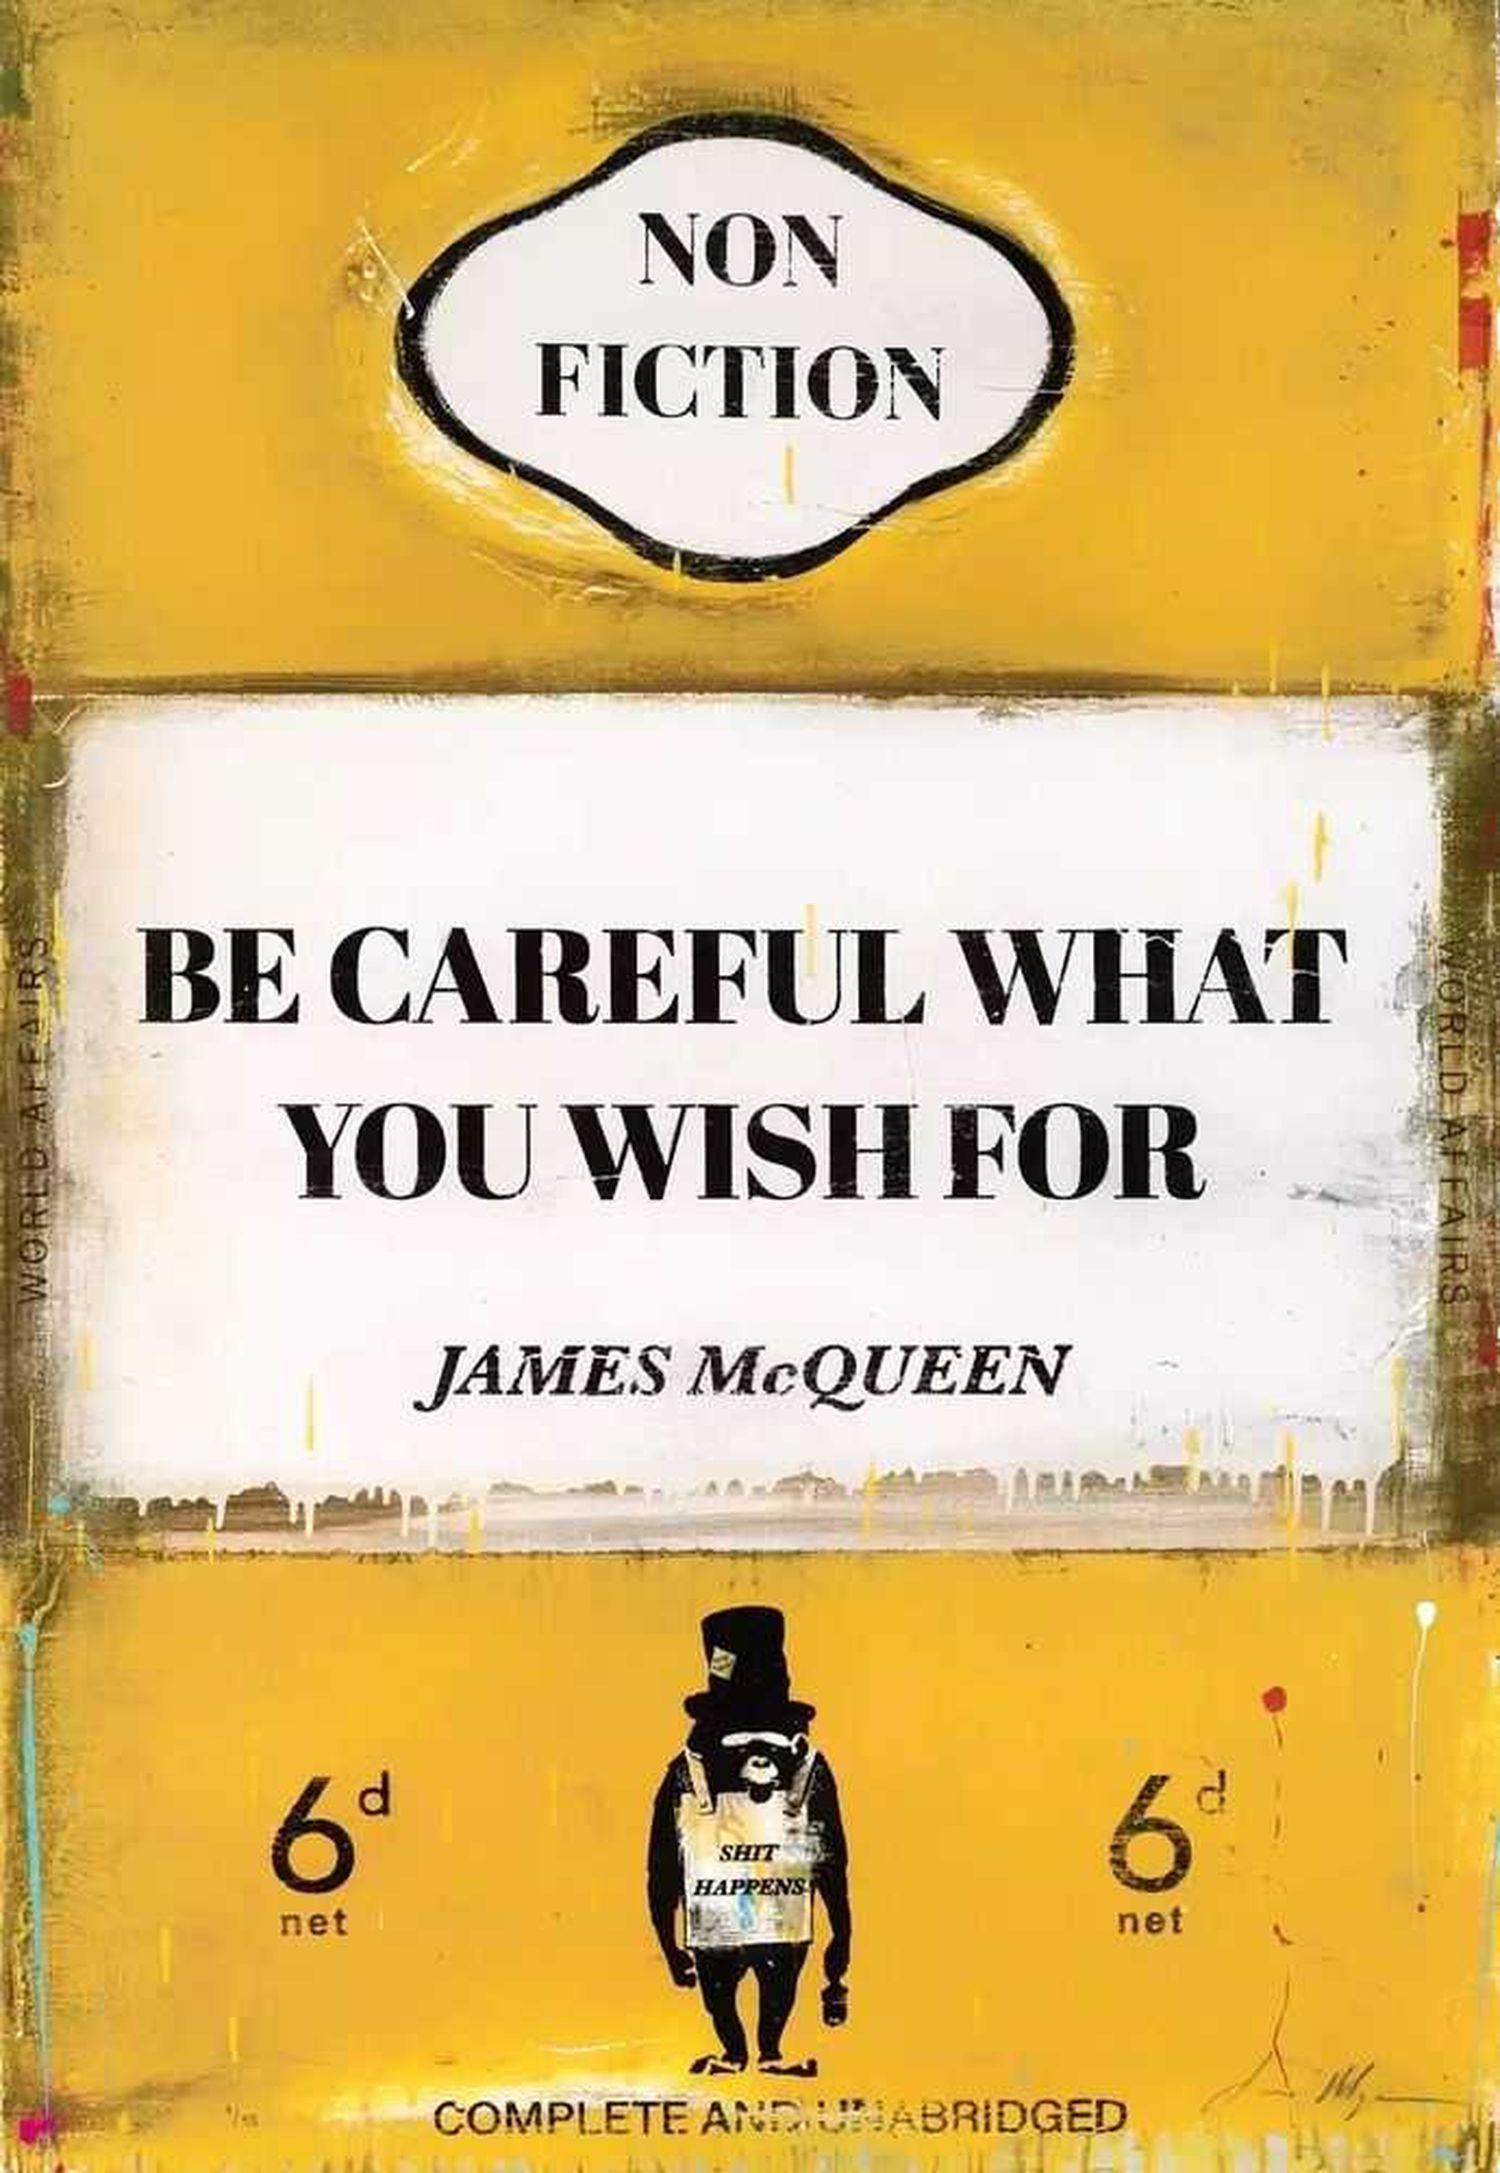 Be Careful What You Wish For

By James McQueen

2022

101.5 x 67.5 cm

40 x 26.6 inch

Print - Mixed media, archival pigment and silkscreen on 410gsm Somerset Satin paper

Edition size - 95

Signed, Numbered, Deckled edges